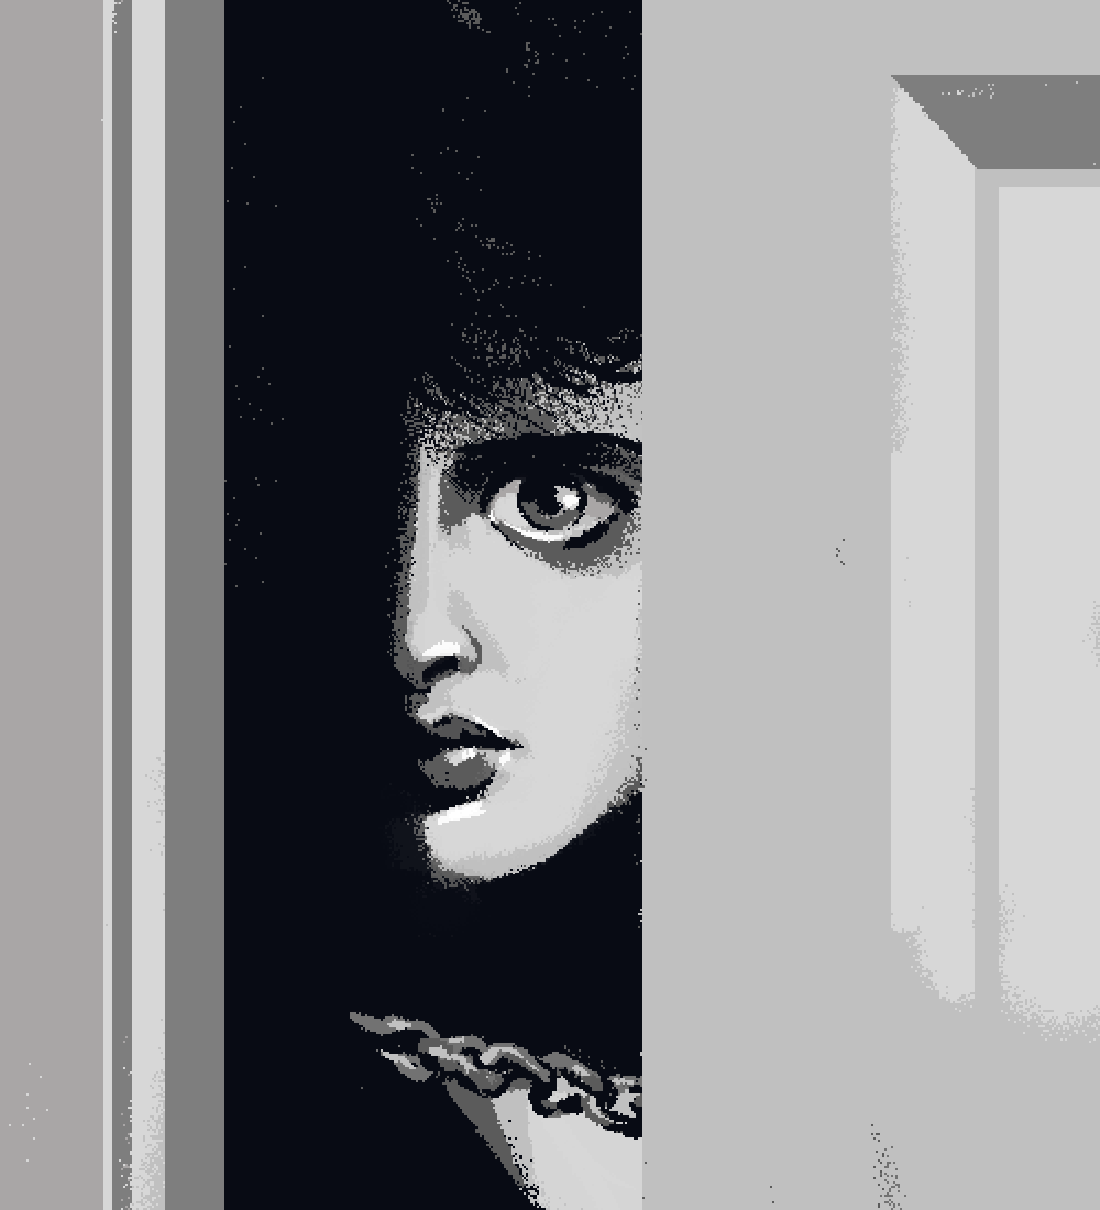 Black and white pixel art drawing of Isabella Rossellini in Blue Velvet. The picture shows her peeking through the crack in an open door which is still chained shut from her side. She looks out intently, with half her face in shadow, only one eye visible.